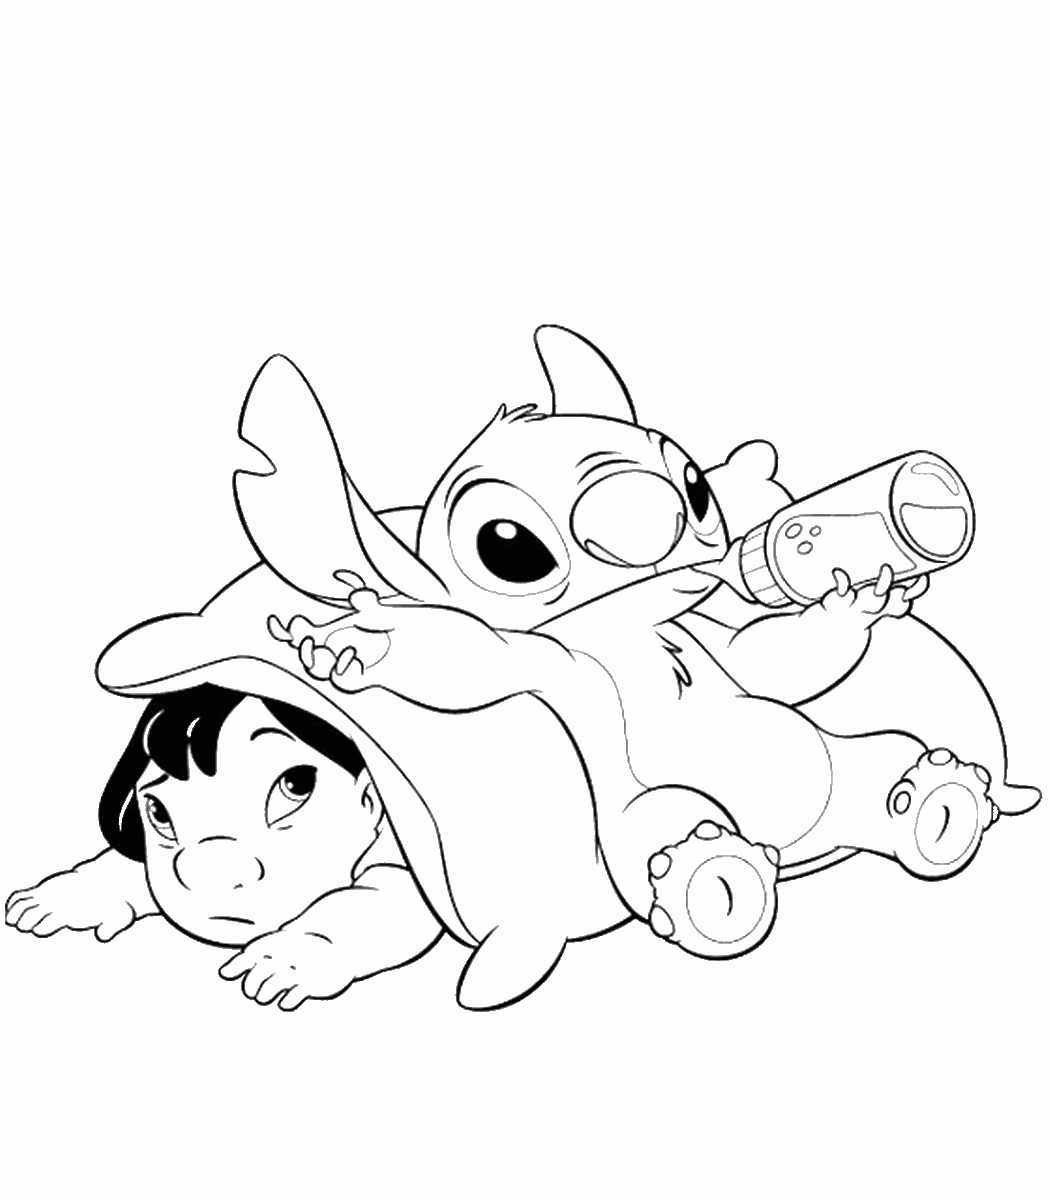 Lilo and Stitch Coloring Pages Cartoons lilo_and_stitch_cl_02 Printable 2020 3795 Coloring4free